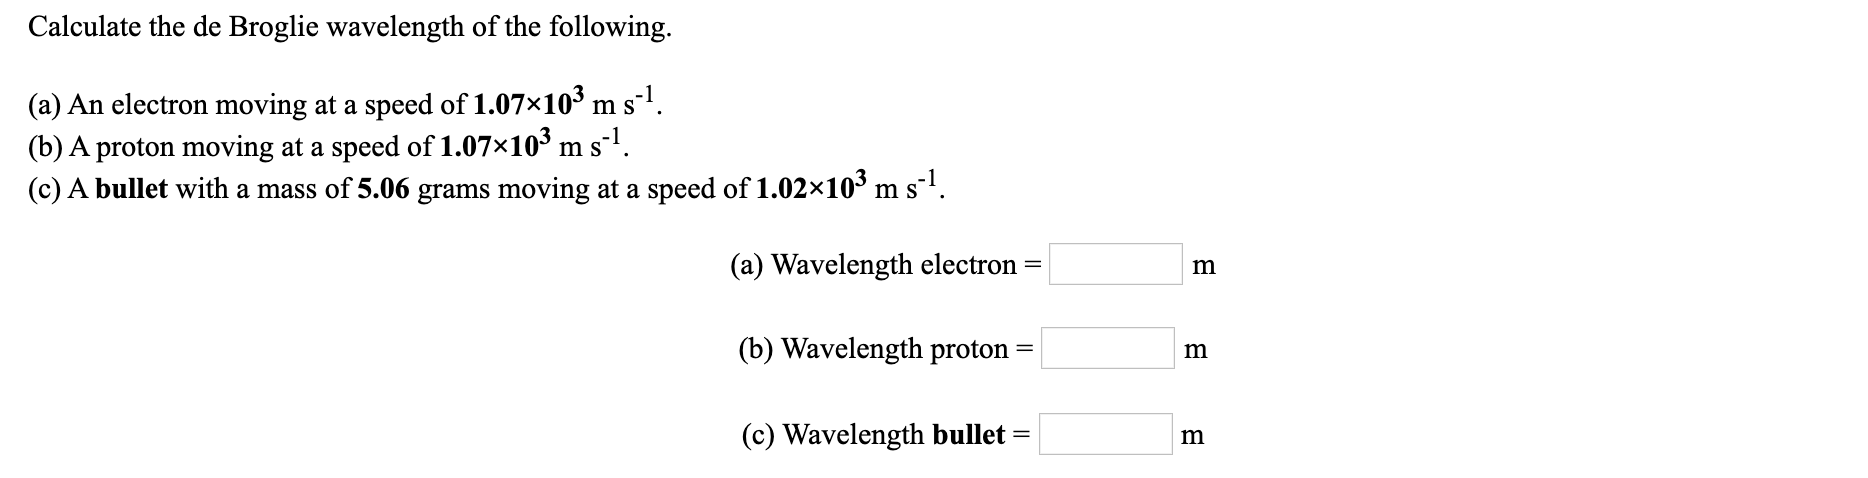 Calculate the de Broglie wavelength of the following.
(a) An electron moving at a speed of 1.07×10³ m sl.
(b) A proton moving at a speed of 1.07×10³ m s-1.
(c) A bullet with a mass of 5.06 grams moving at a speed of 1.02×10³ m s-'.
(a) Wavelength electron
(b) Wavelength proton
(c) Wavelength bullet
